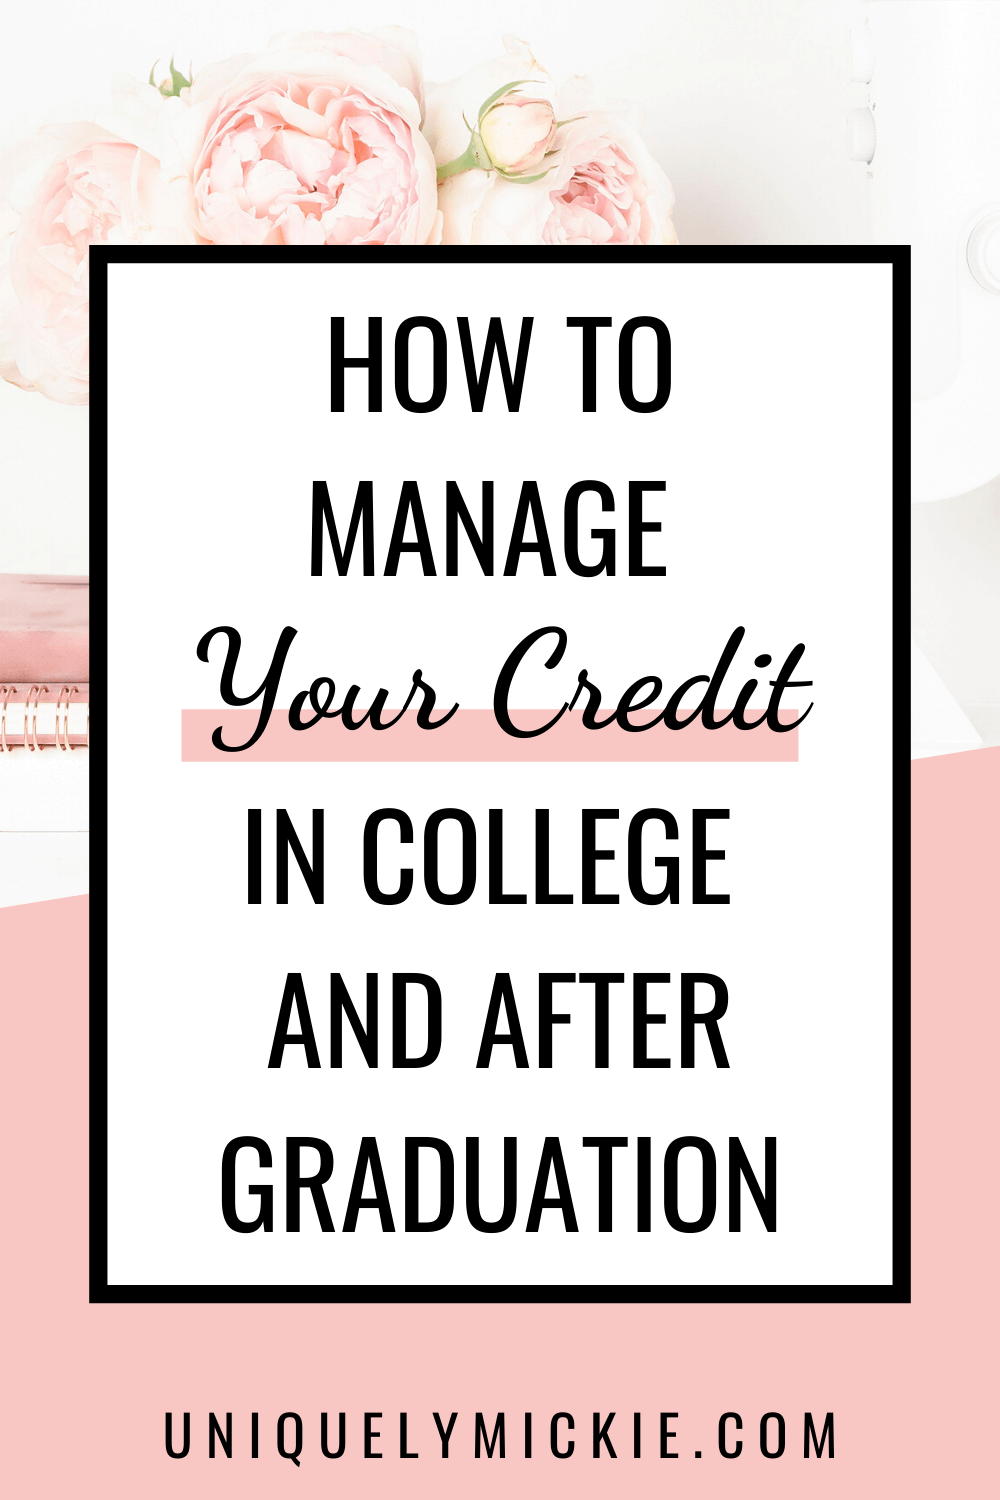 If you’re in college or graduating soon, then now is the time for you to learn how to manage and improve your credit score! I’m partnering with Lexington Law to give you some tips on what I did to improve my credit score to the 800 club and how you can too! Take a peak for more details about how Lexington Law can help you achieve your credit goals!